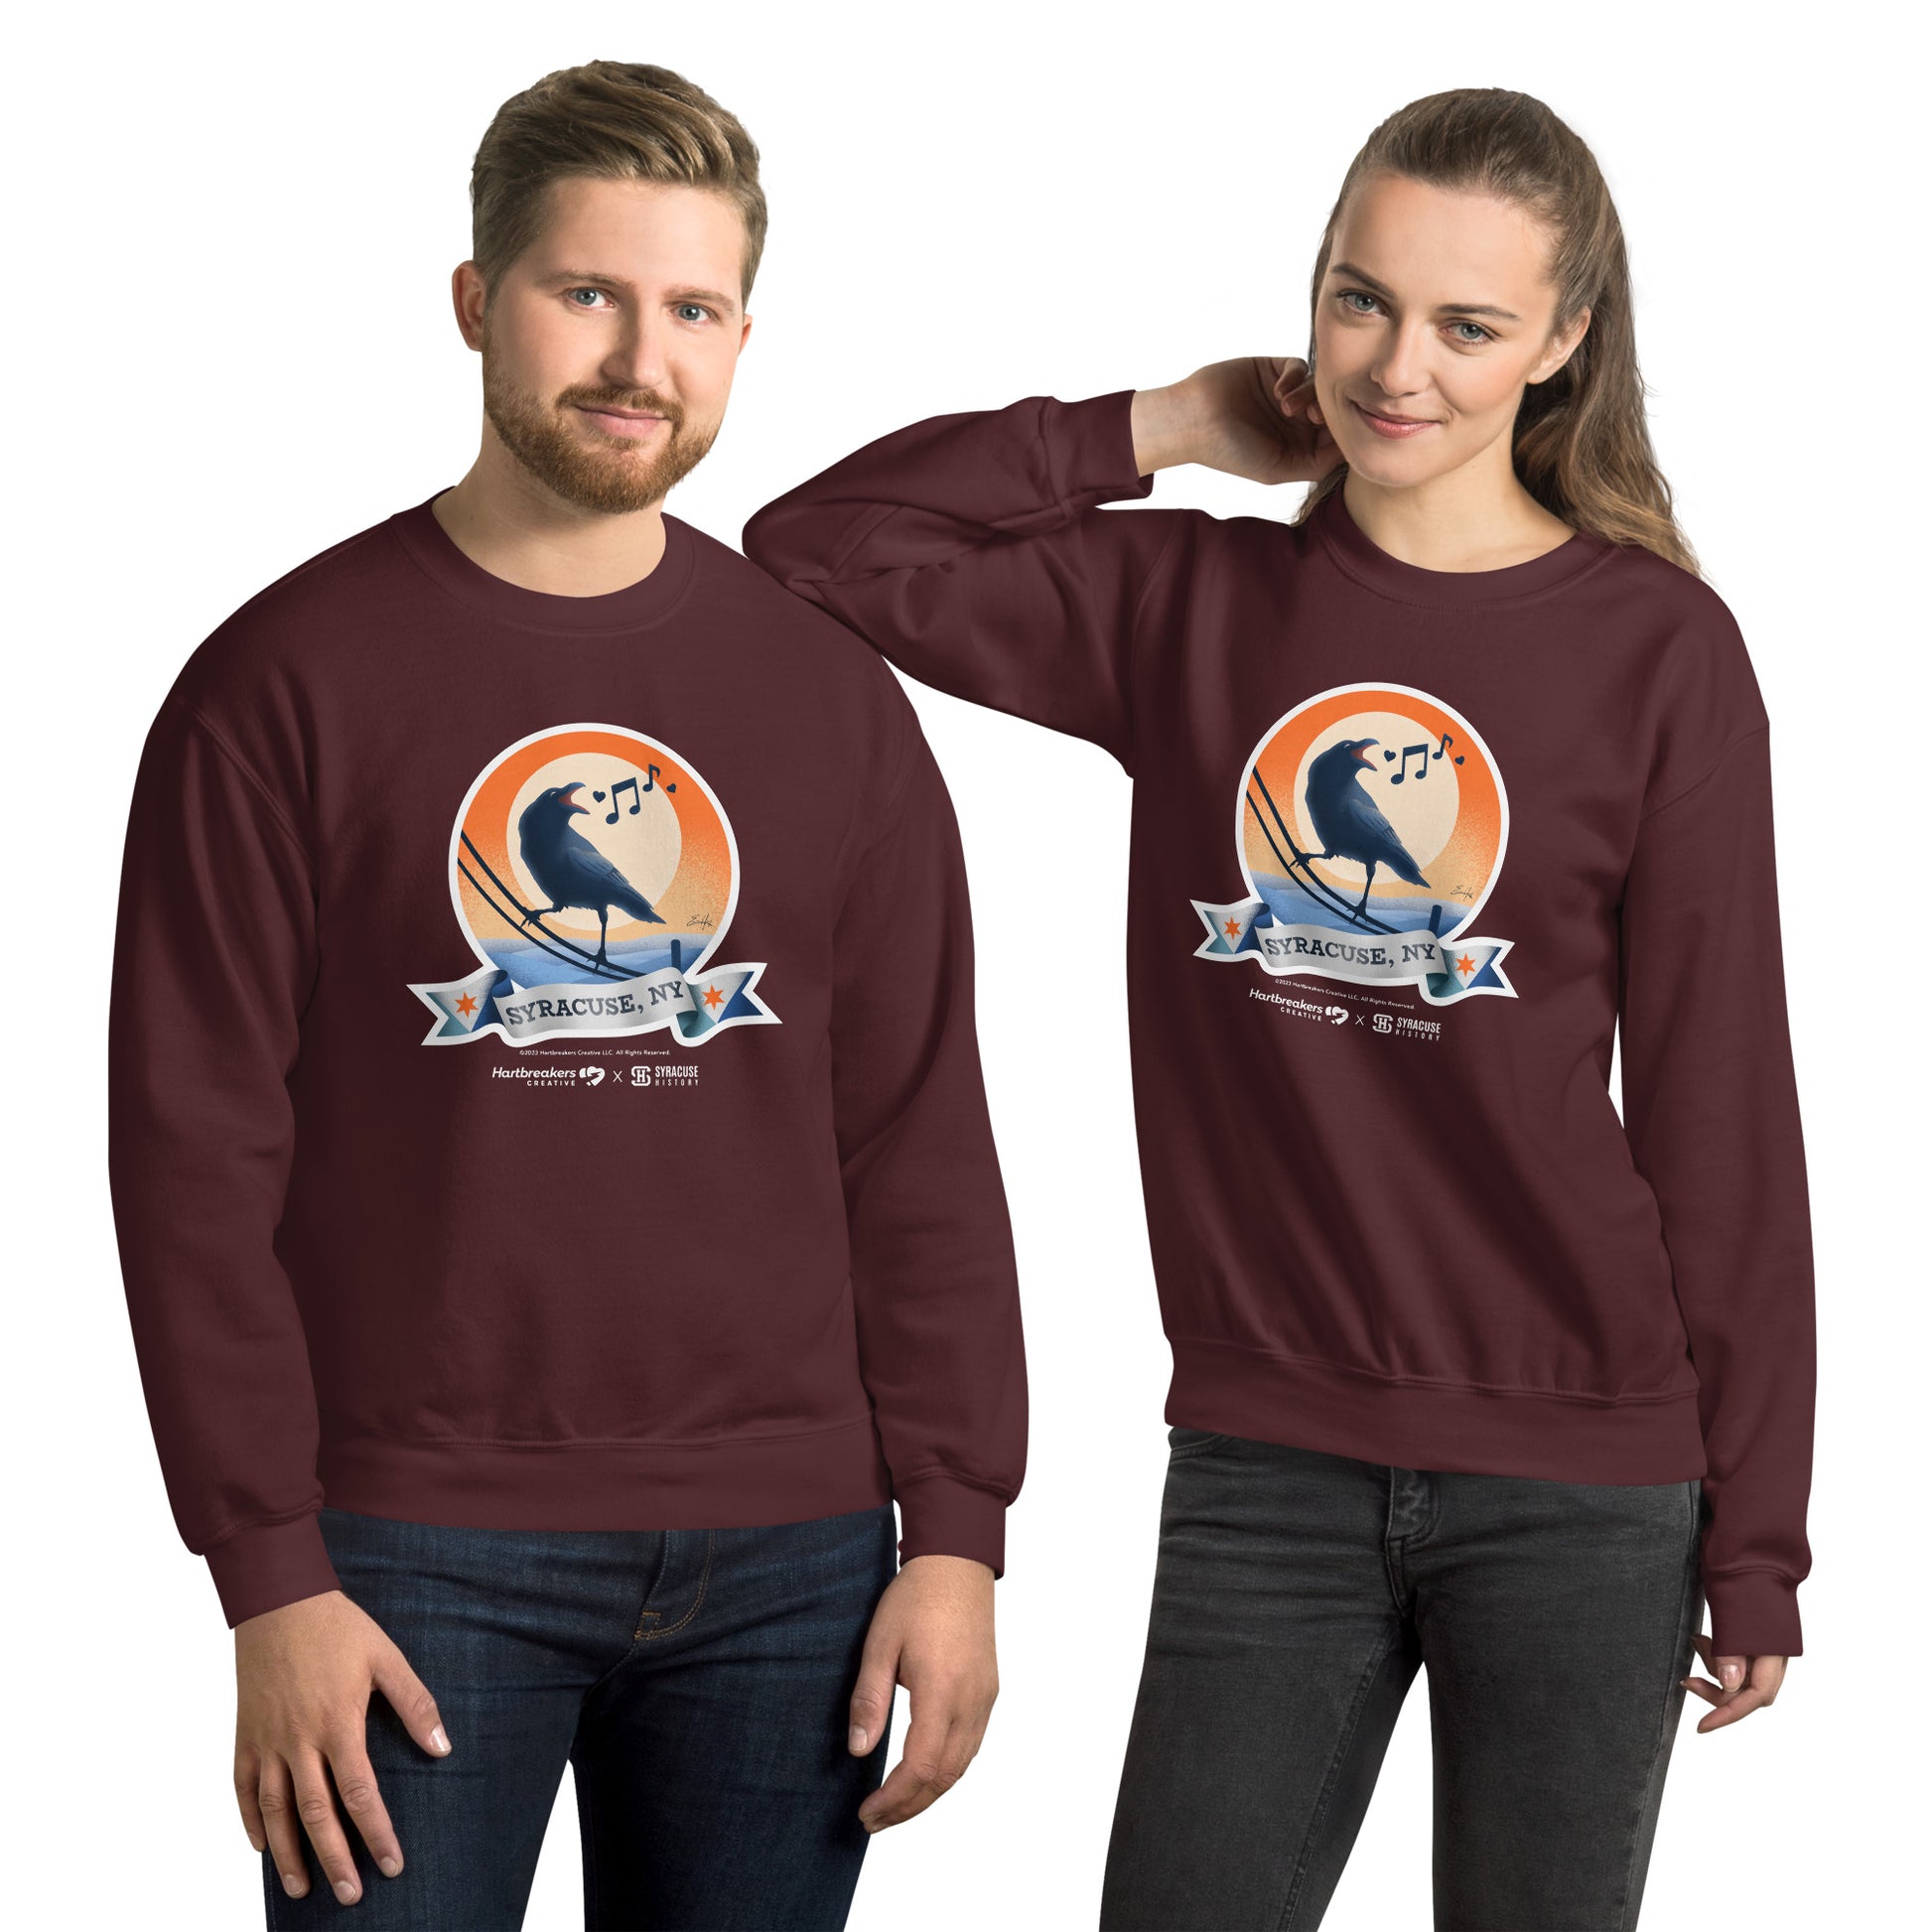 A man and woman wearing maroon sweatshirts featuring an illustration of a crow on a telephone wire and a banner beneath it that says Syracuse, NY